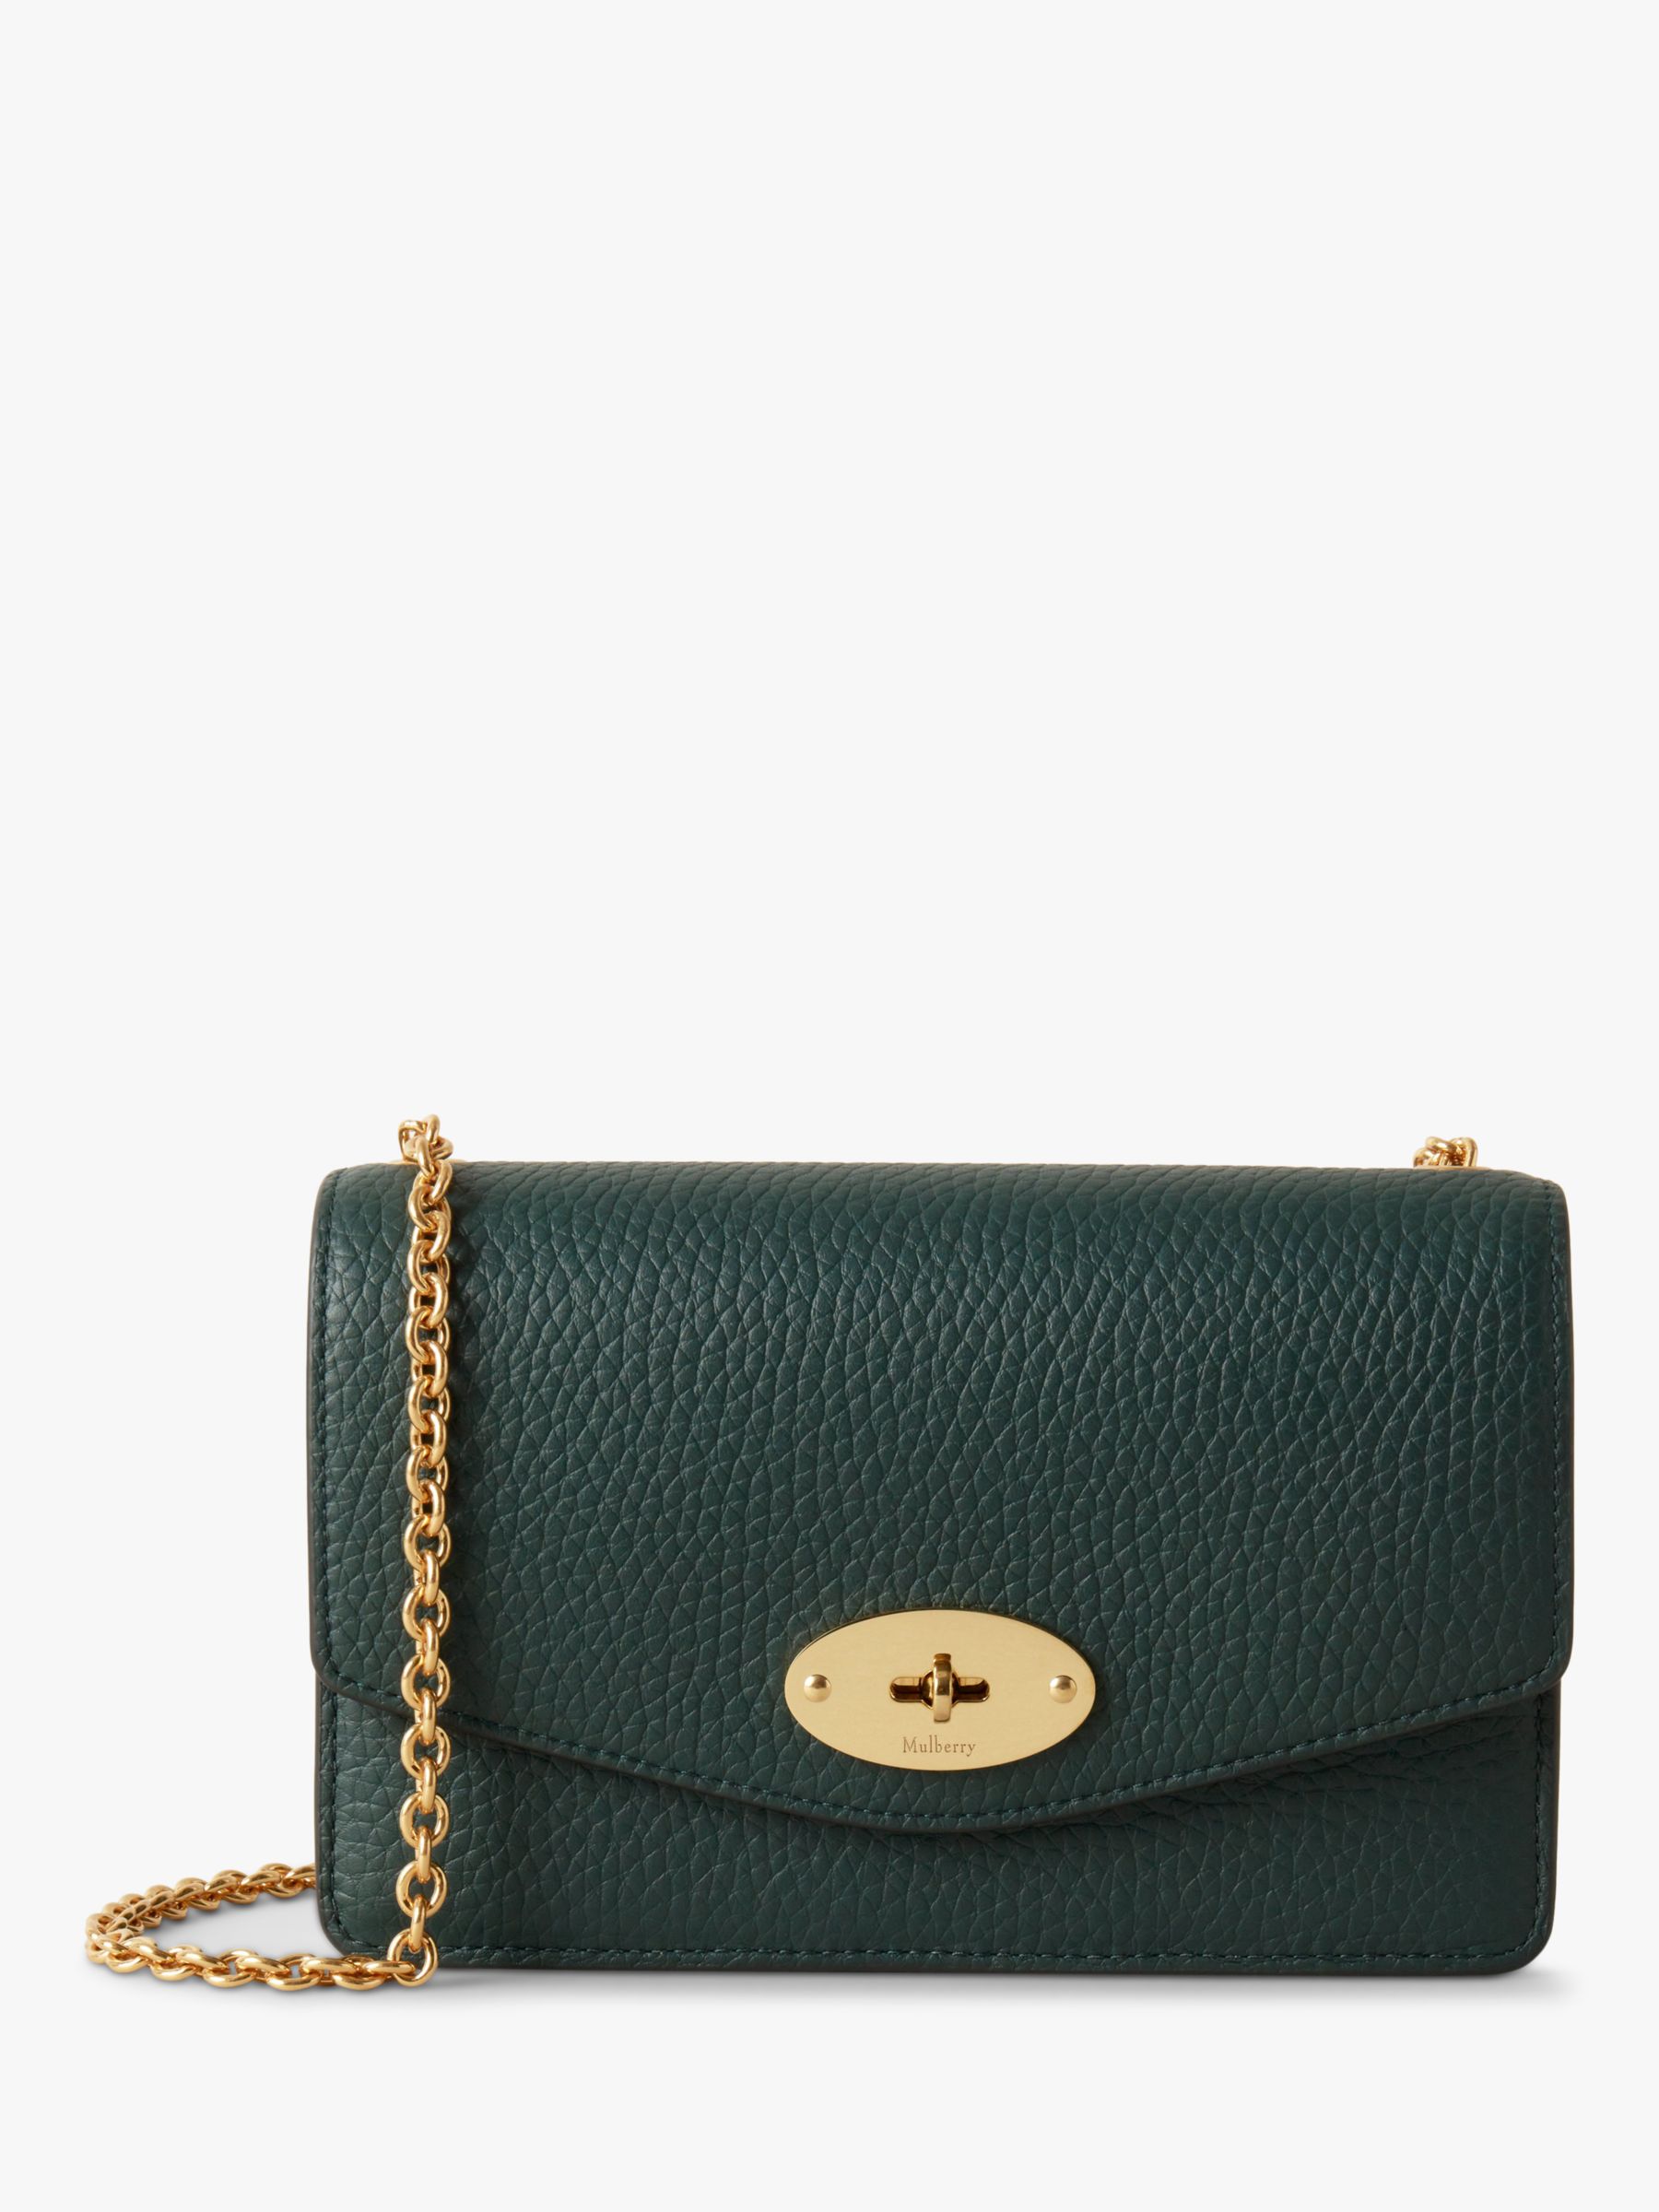 Mulberry Small Darley Heavy Grain Leather Cross Body Bag, Mulberry ...